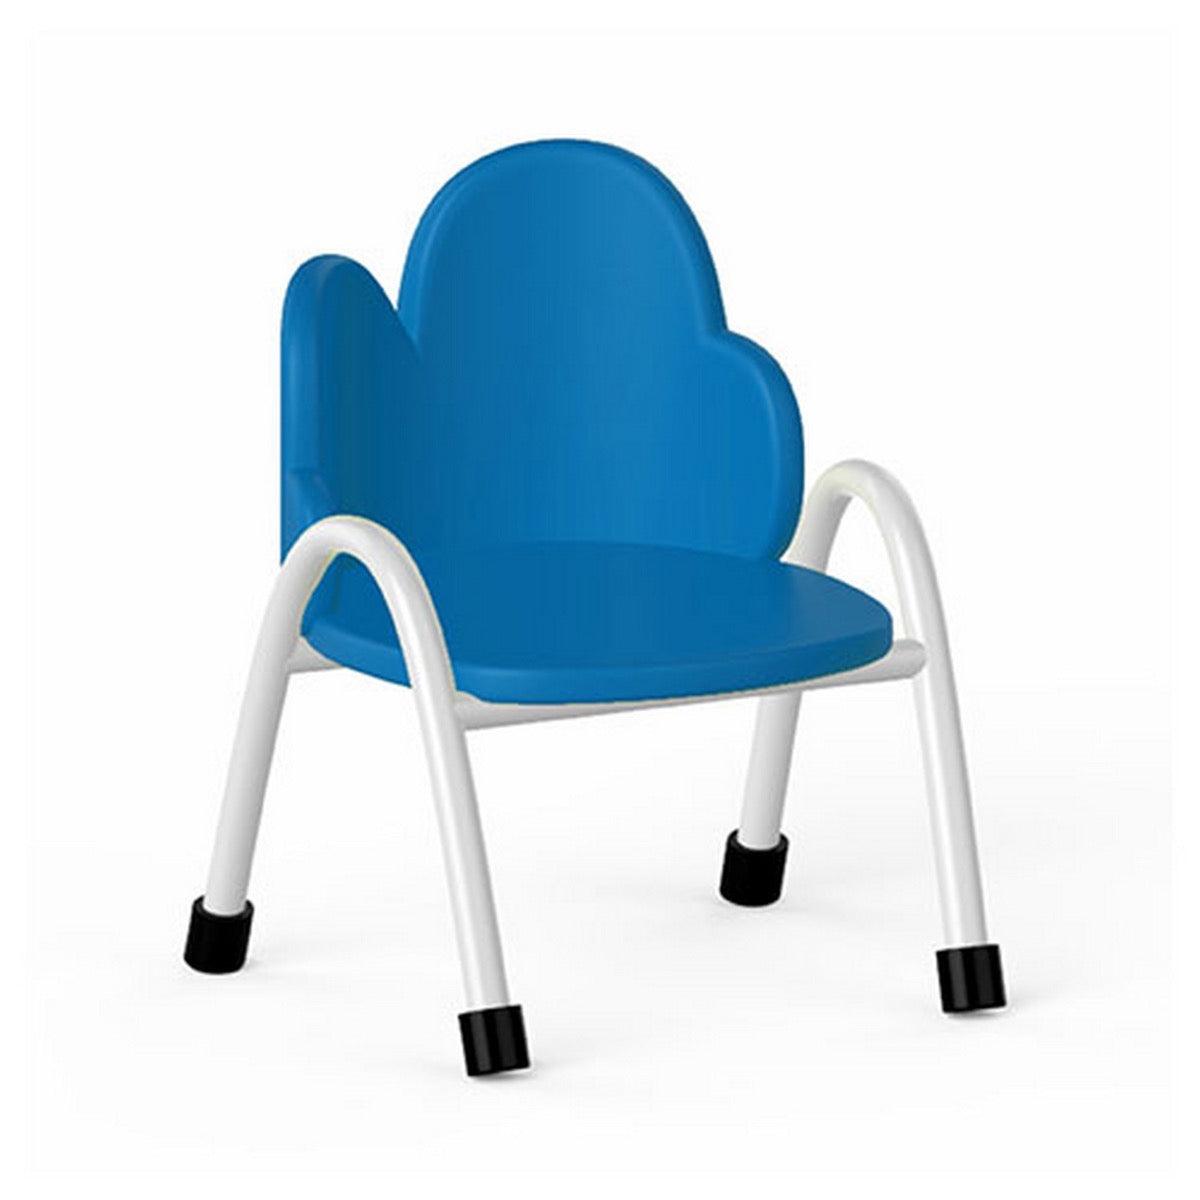 Ok Play Cloud Chair, Study Chair, Sturdy And Durable Chair, Plastic Chair, Perfect For Home, Creches And School, Blue, 2 to 4 Years, Height 8 Inches